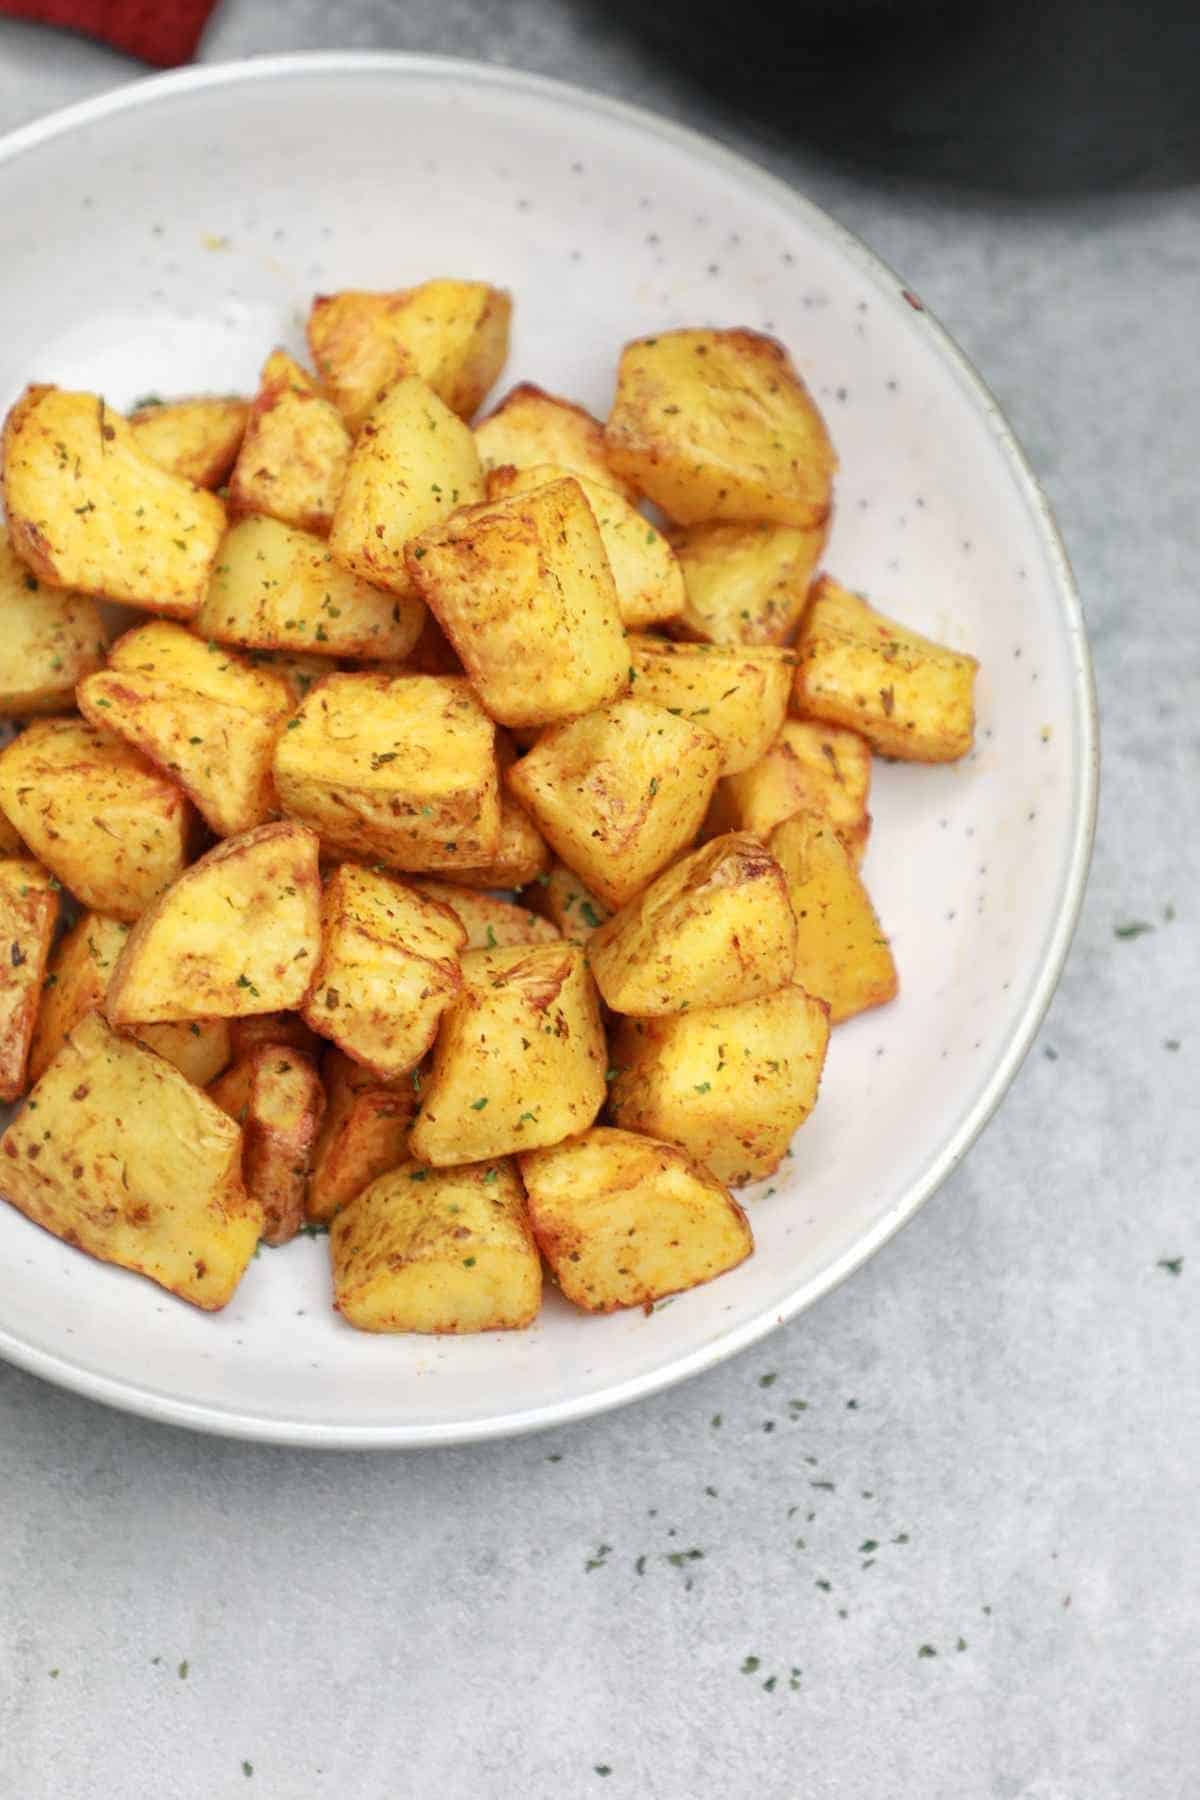 cubed potatoes served on a plate.